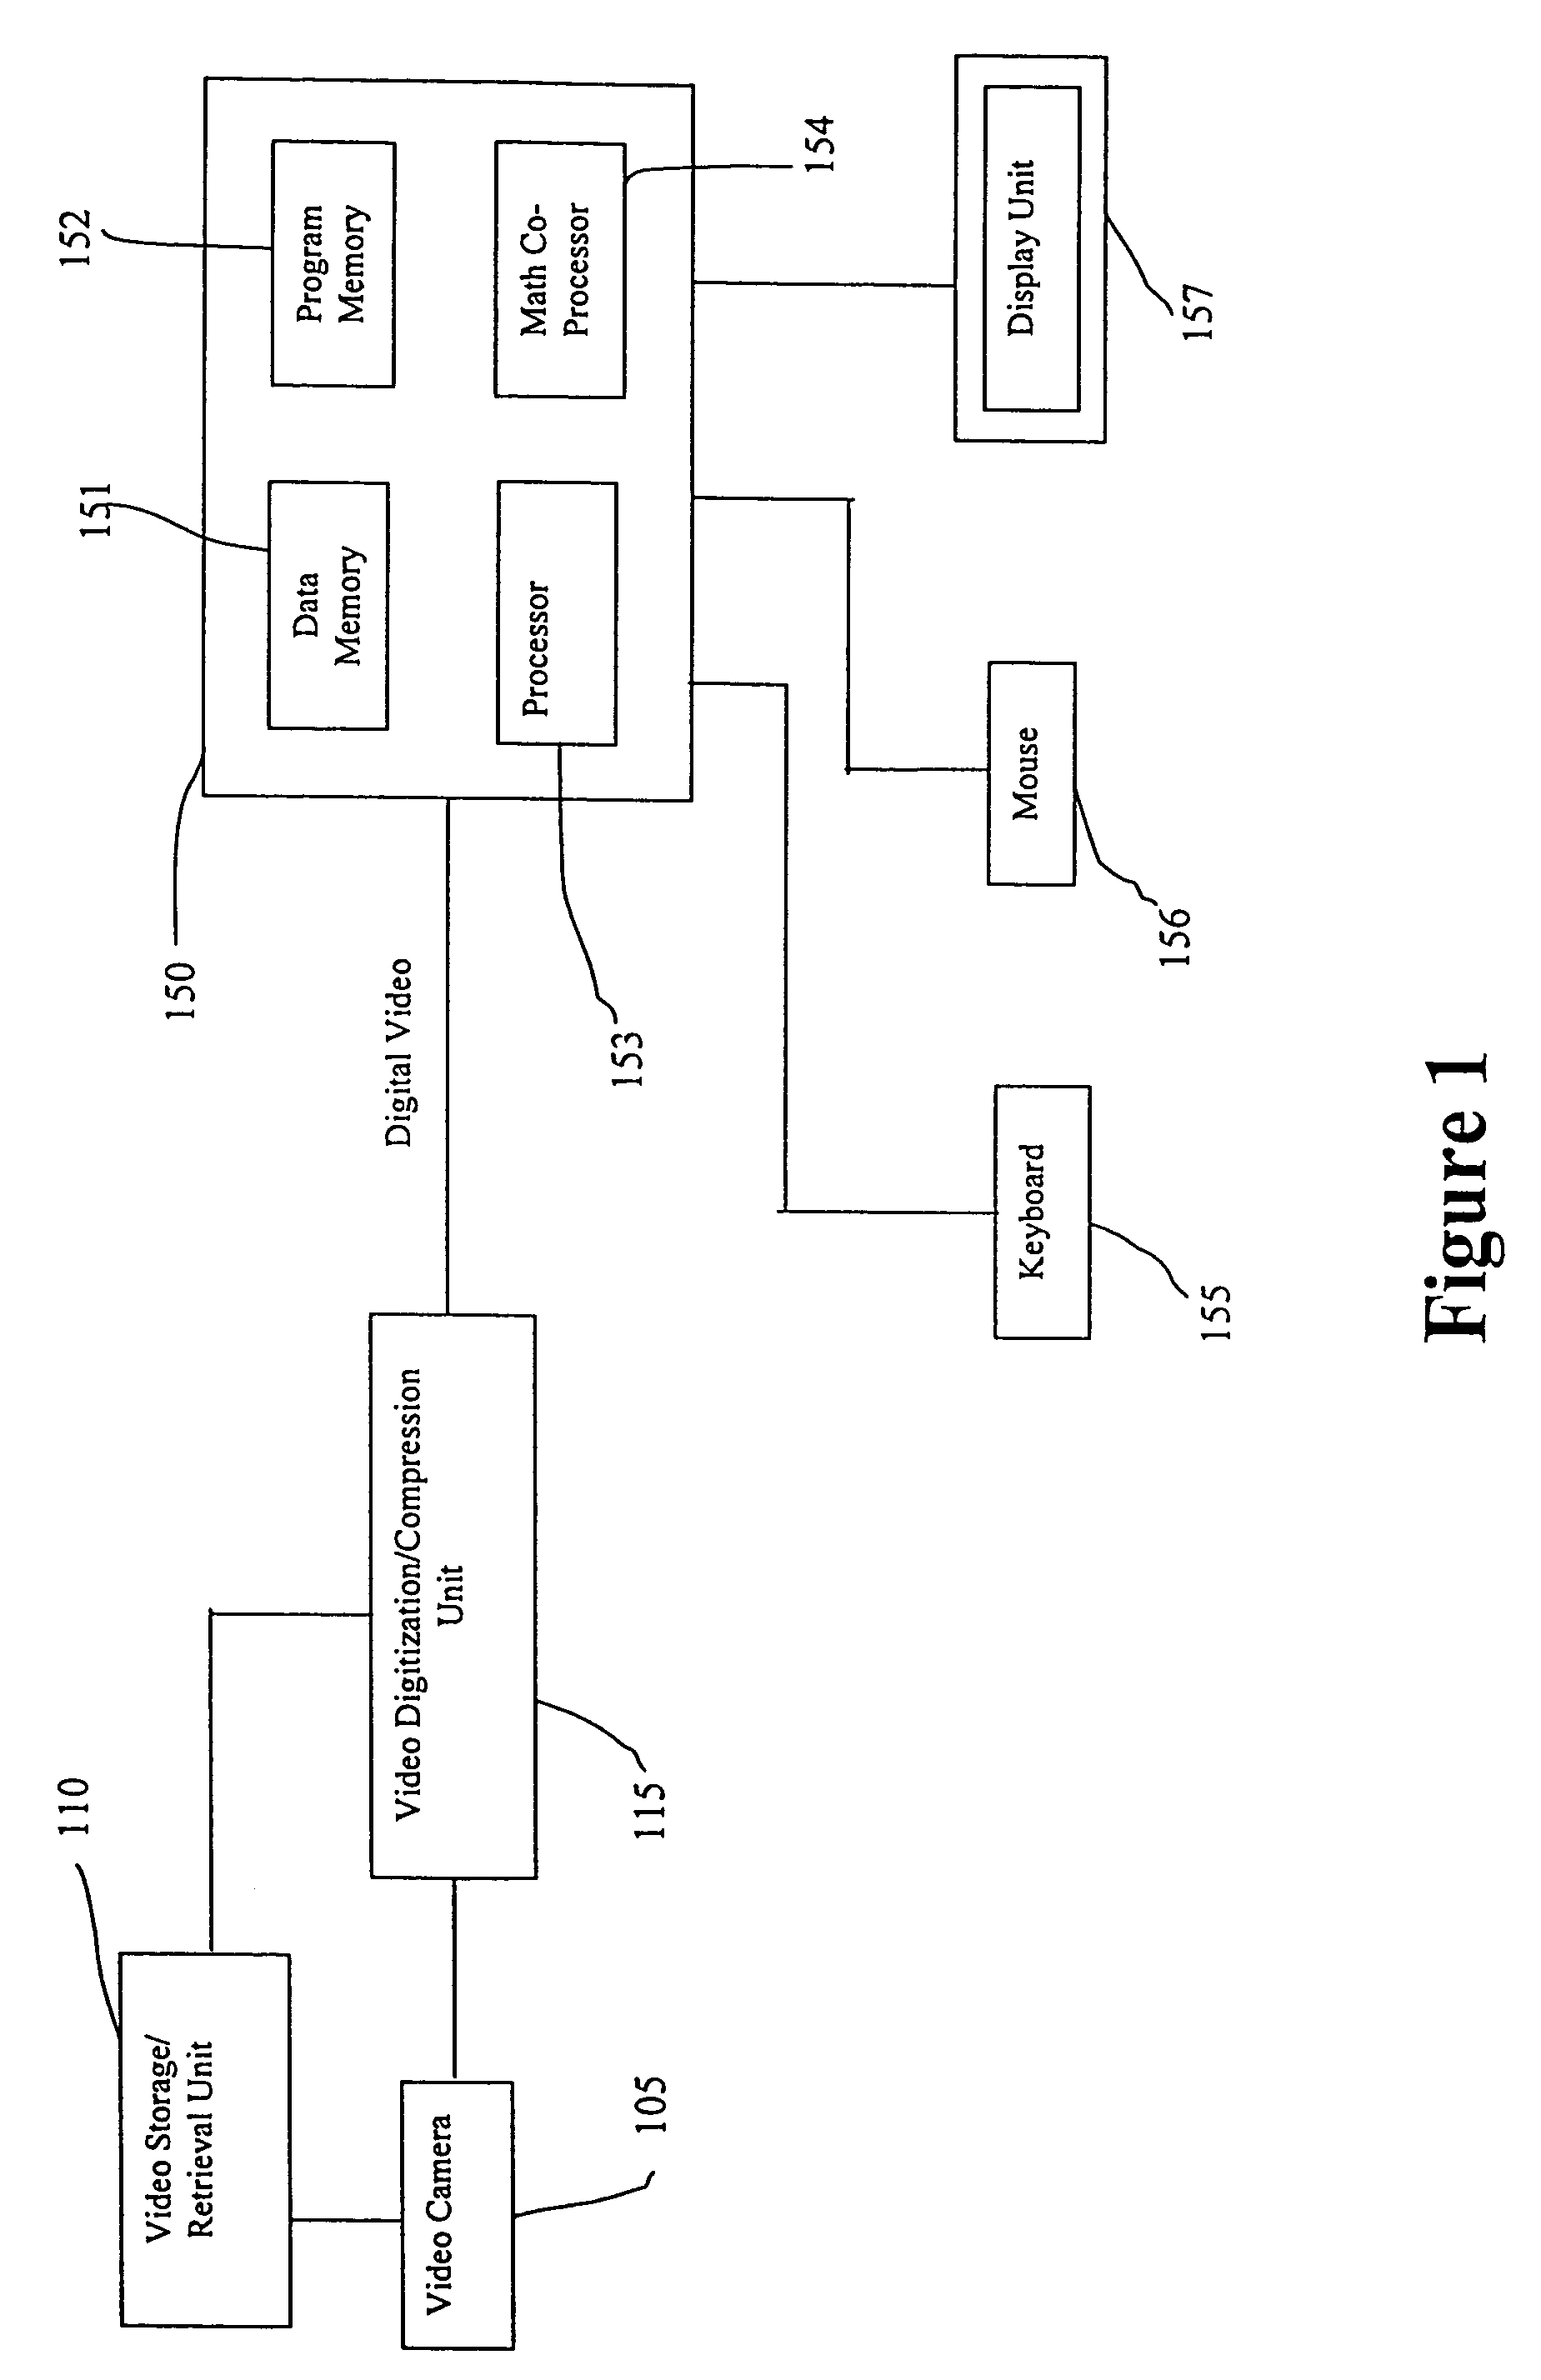 System and method for object identification and behavior characterization using video analysis